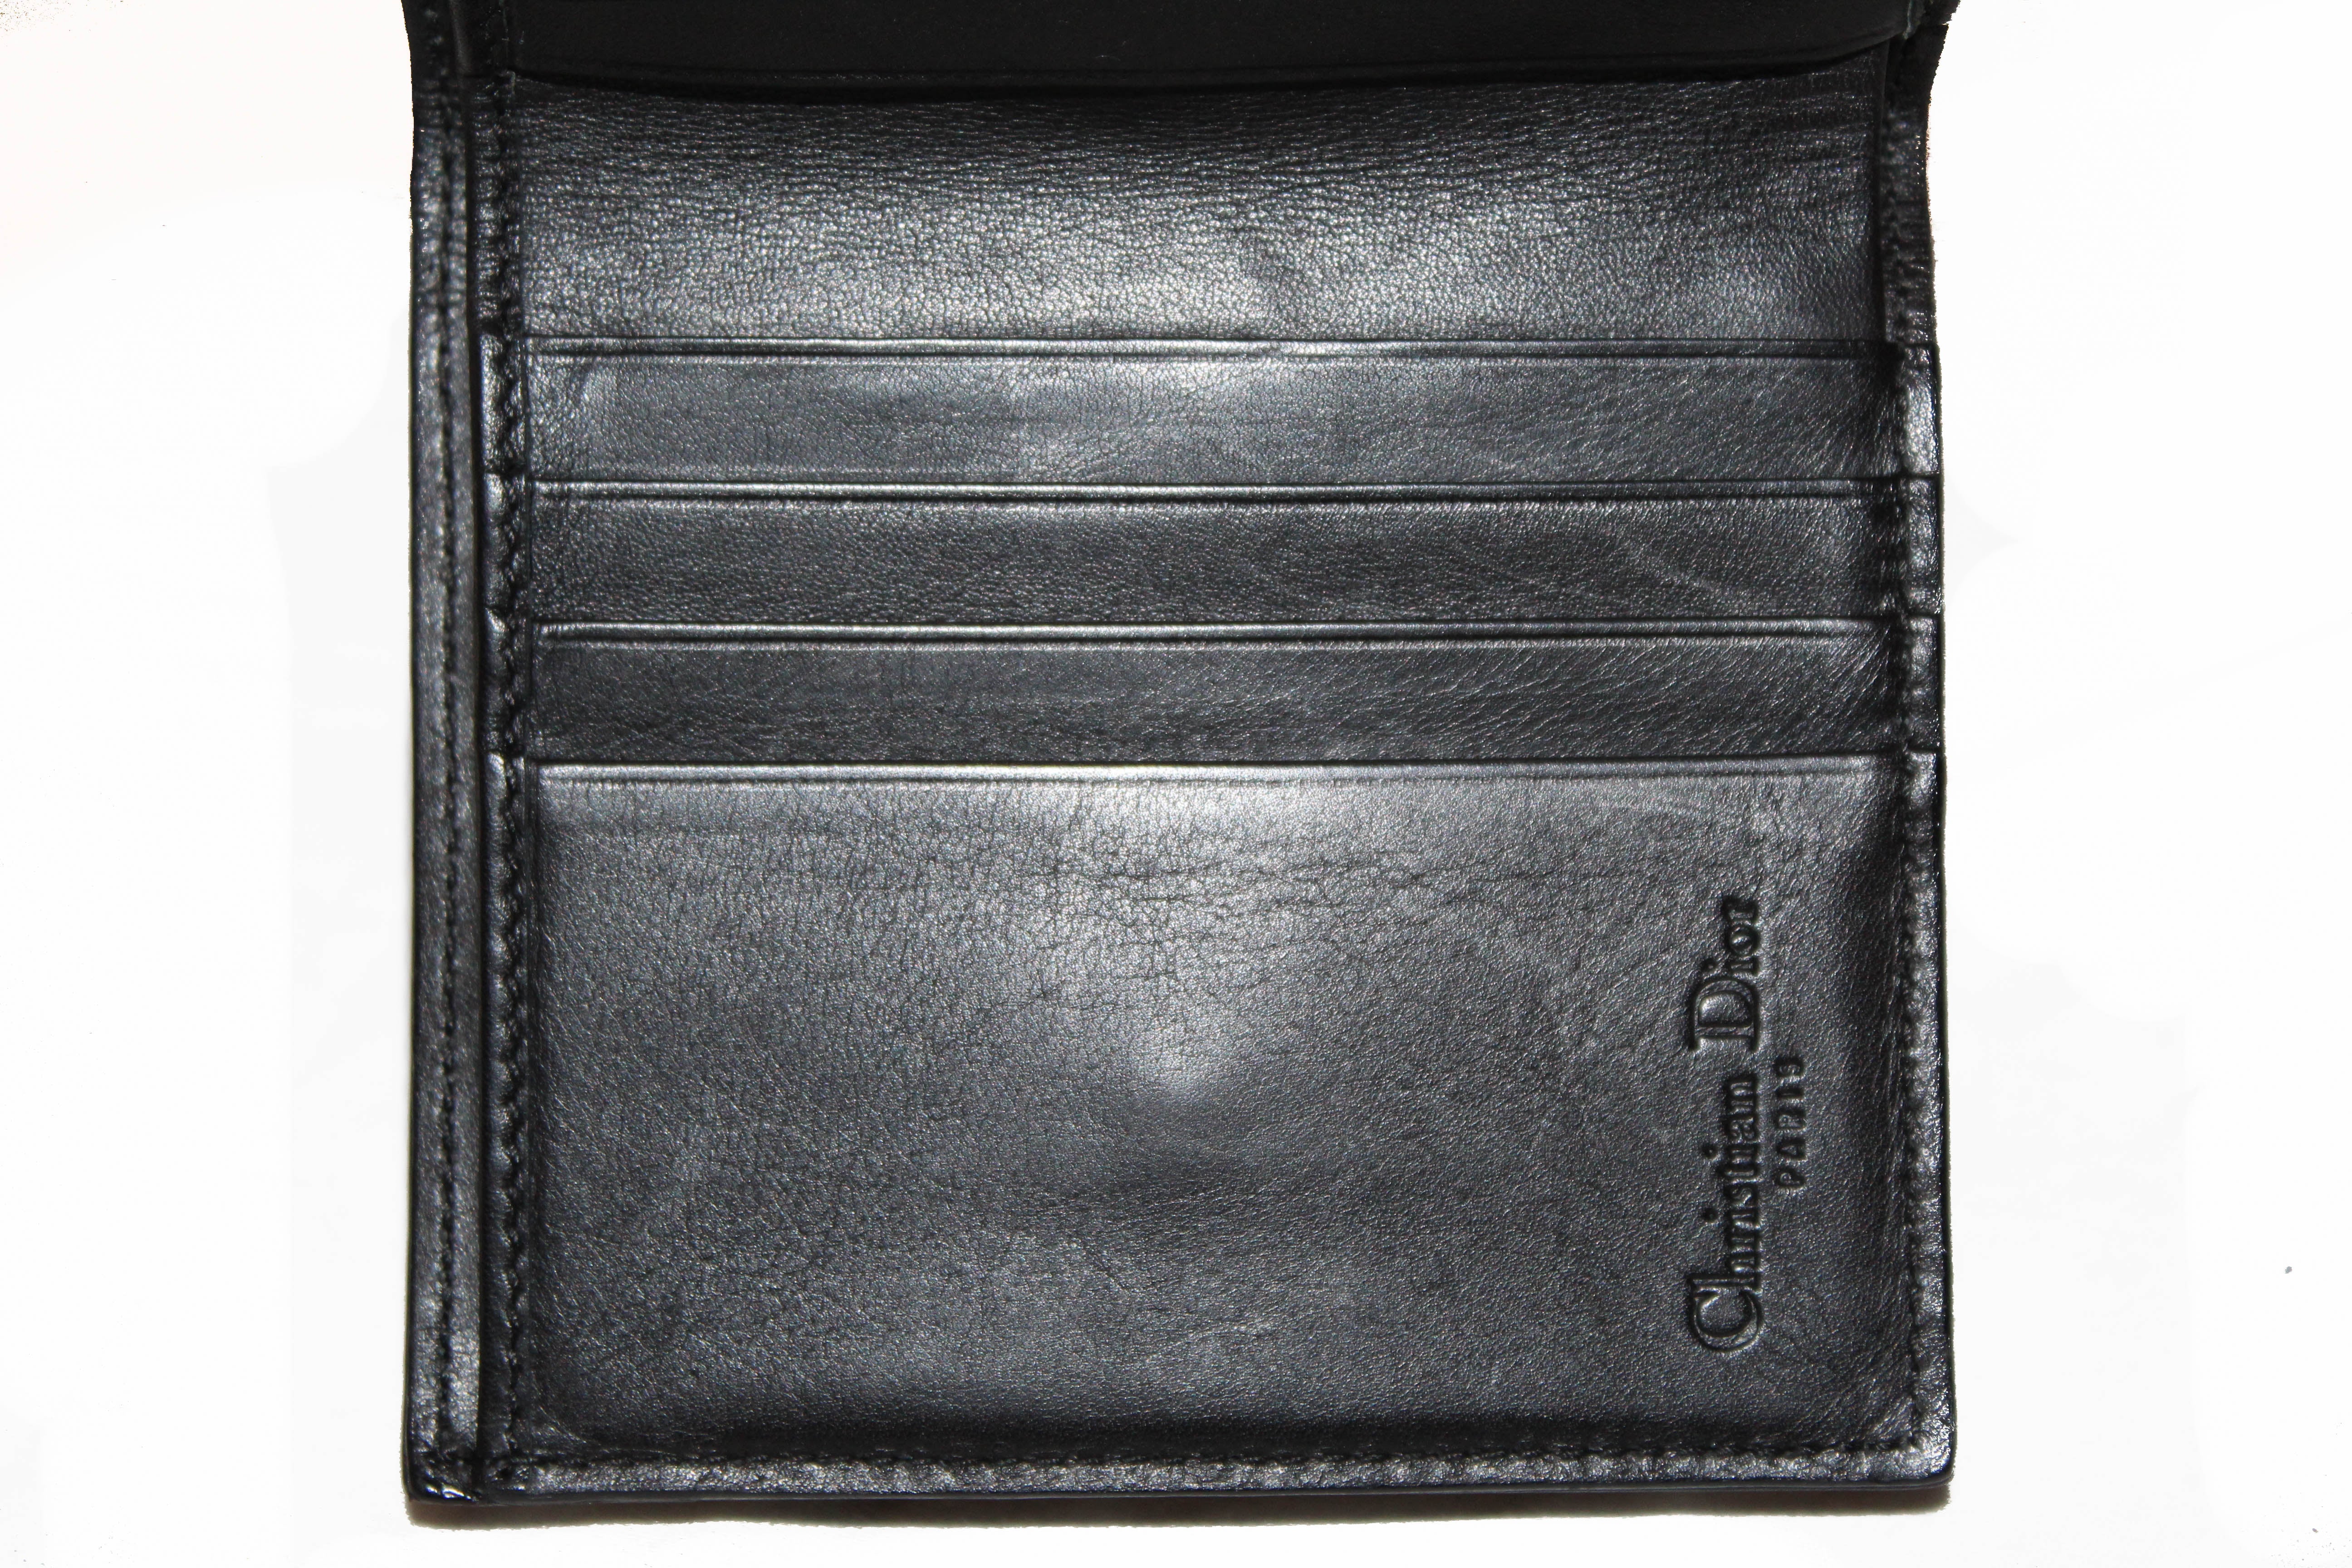 Authentic Christian Dior Black Suede/Lambskin Leather Small Wallet